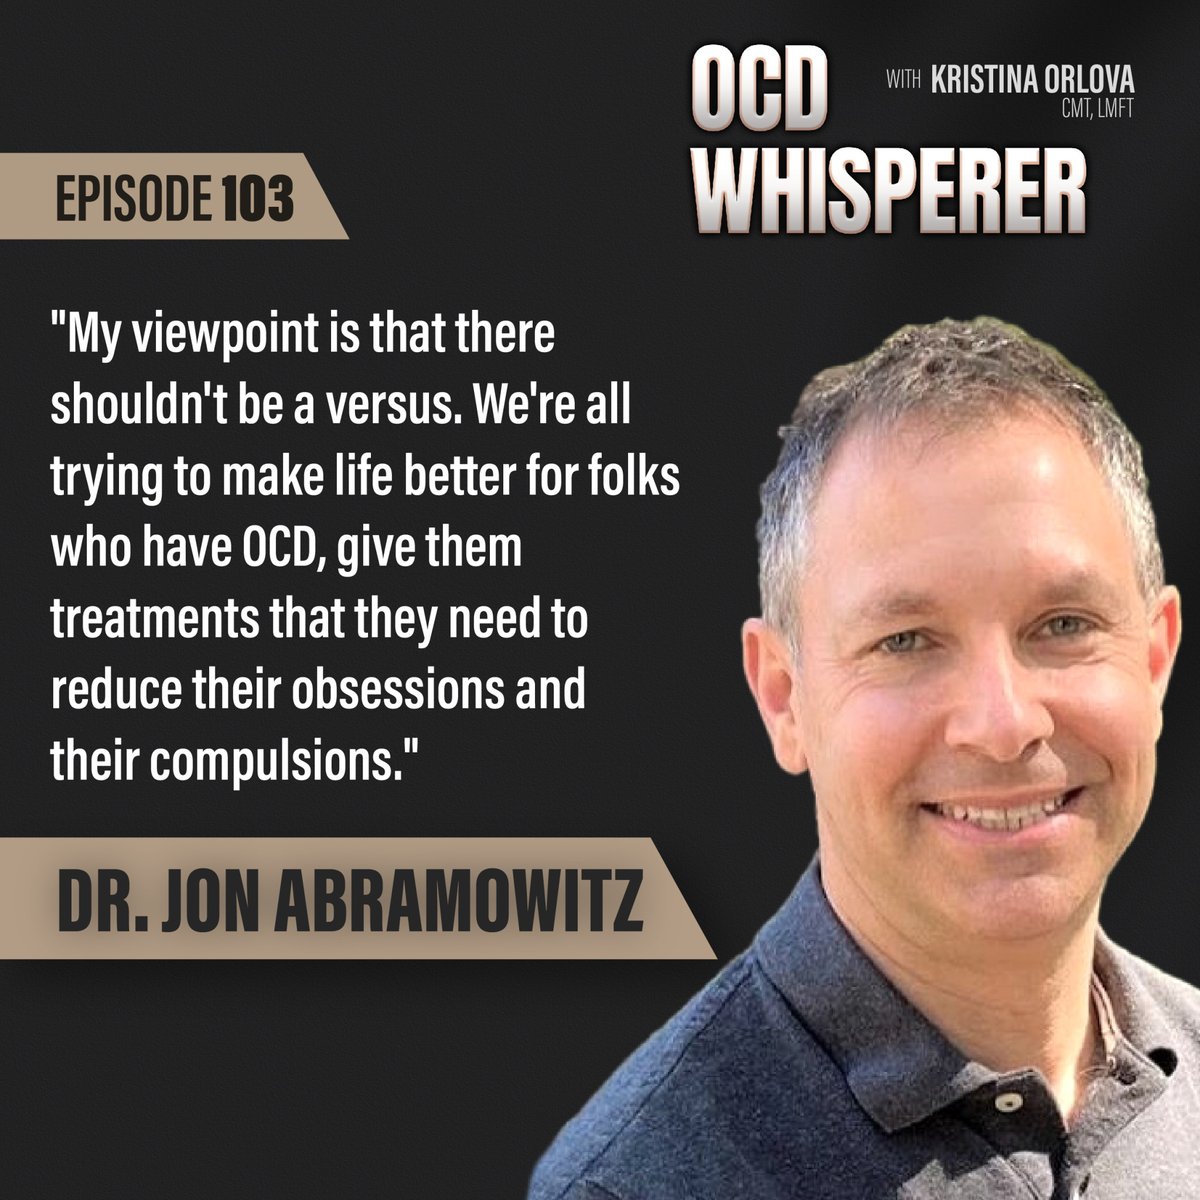 OCD Whisperer Show is about #allthingsocd. In this weeks episode we delve into evidence based therapies. Dr. Abramowitz shares his thoug...
#pocd #rocd #realeventocd #existentialocd #ocdlife #ocdwhisperer #contaminationocd #pureo #perinatalocd #postpartumocd #pocd #anxietypodcast